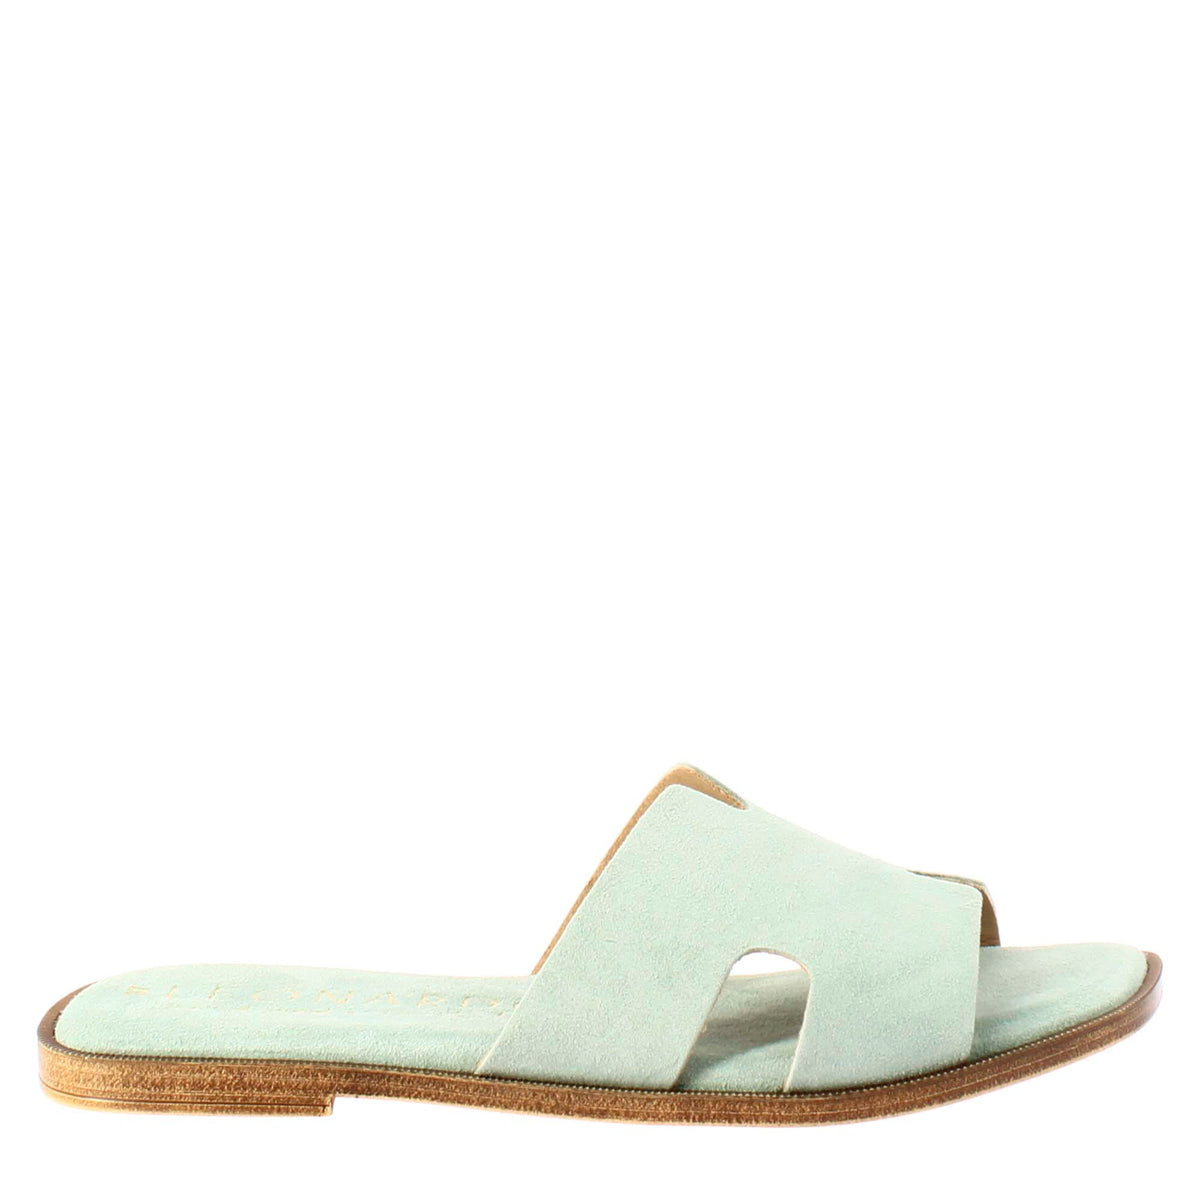 Women's H-shaped sandals in green suede leather